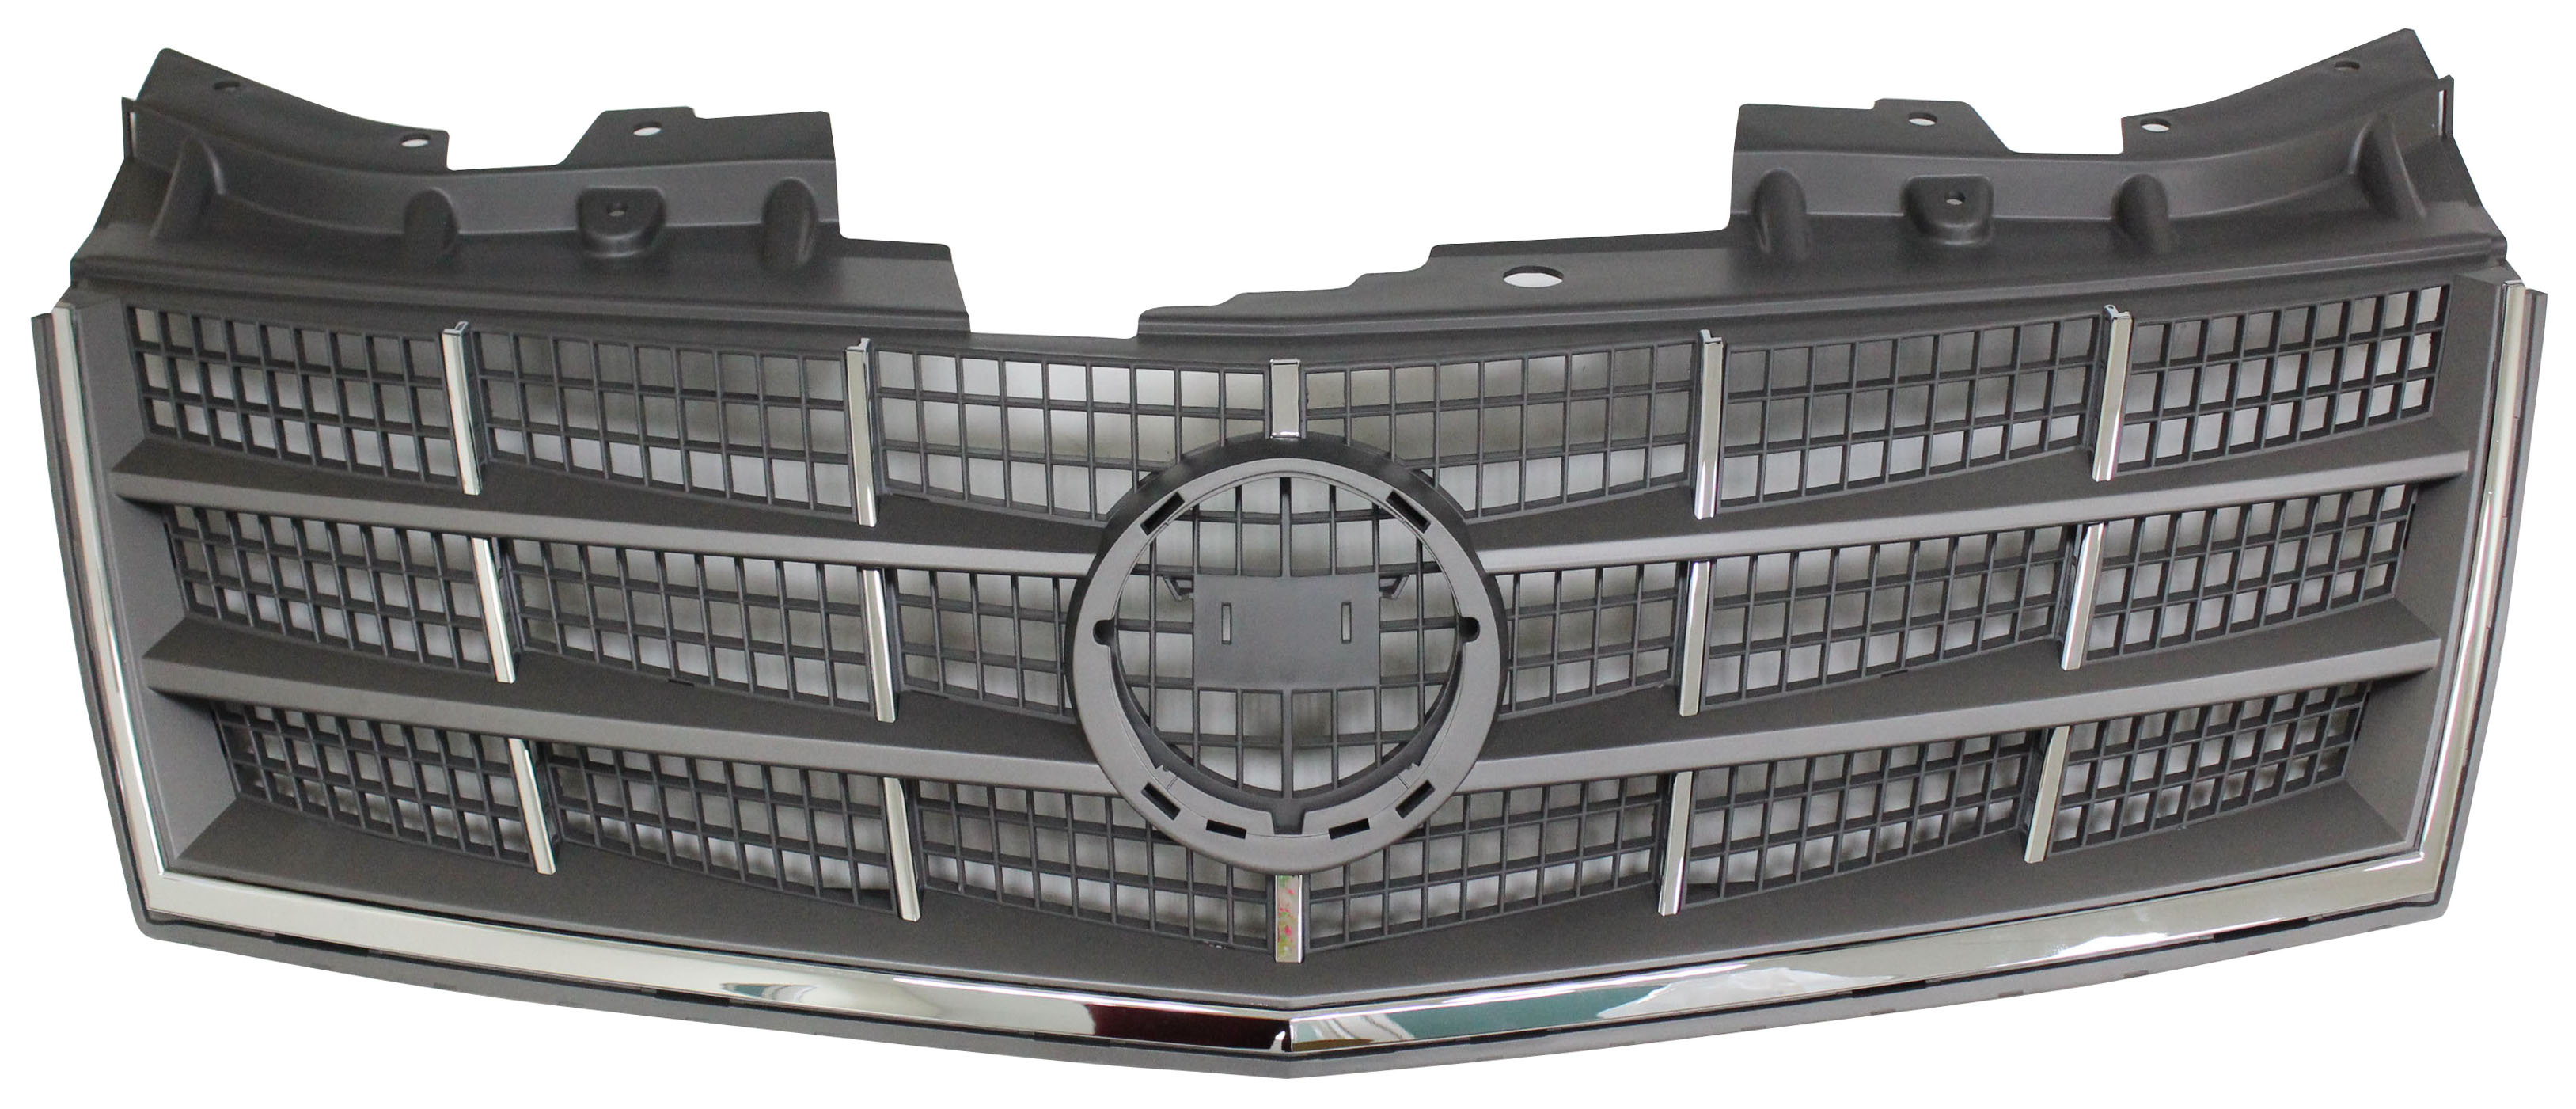 Aftermarket GRILLES for CADILLAC - STS, STS,08-11,Grille assy